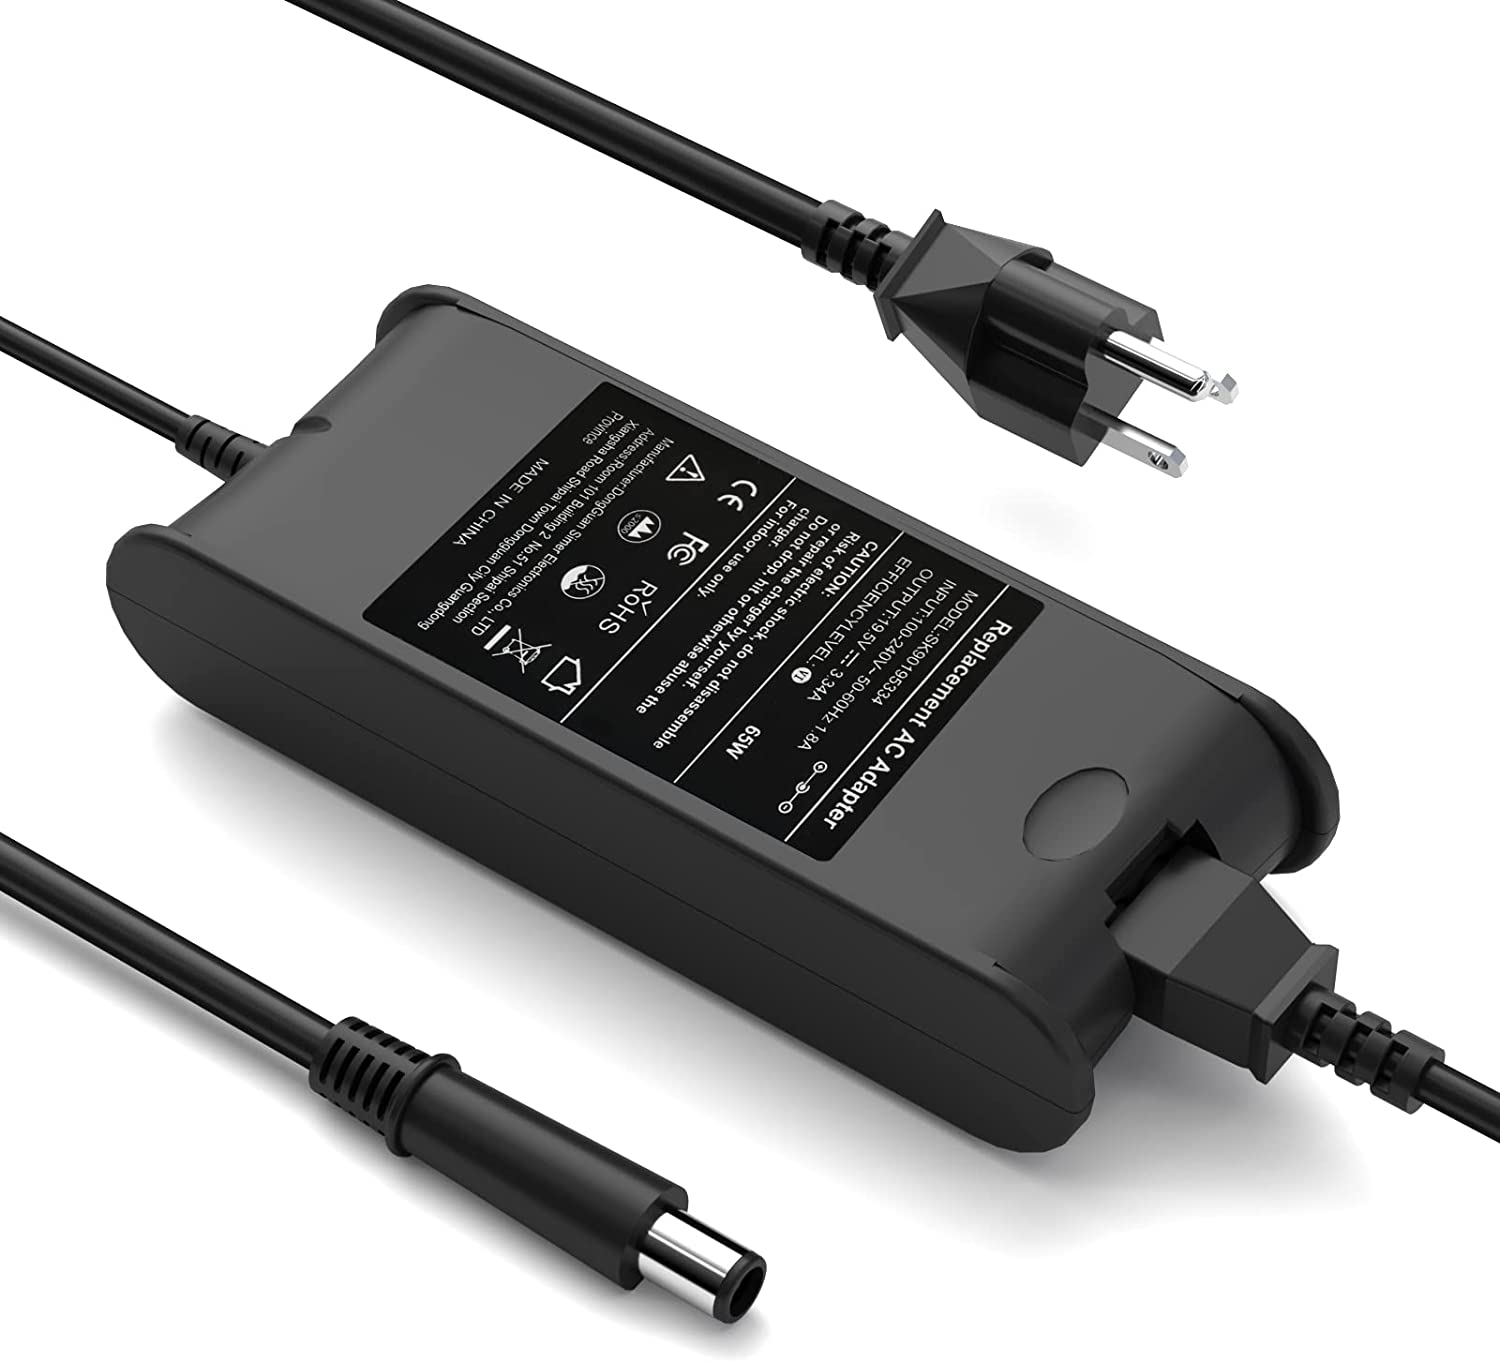 19.5V 3.34A 65W Laptop Charger Replacement for Dell Latitude E5430 E6410 E5440 E5470 E6420 E6430 E6440 E6540 E7250 E7440 E7450 5400 5480 5490 7480 7490 LA65NM130 HA65NM130 AC Adapter Power Supply Cord